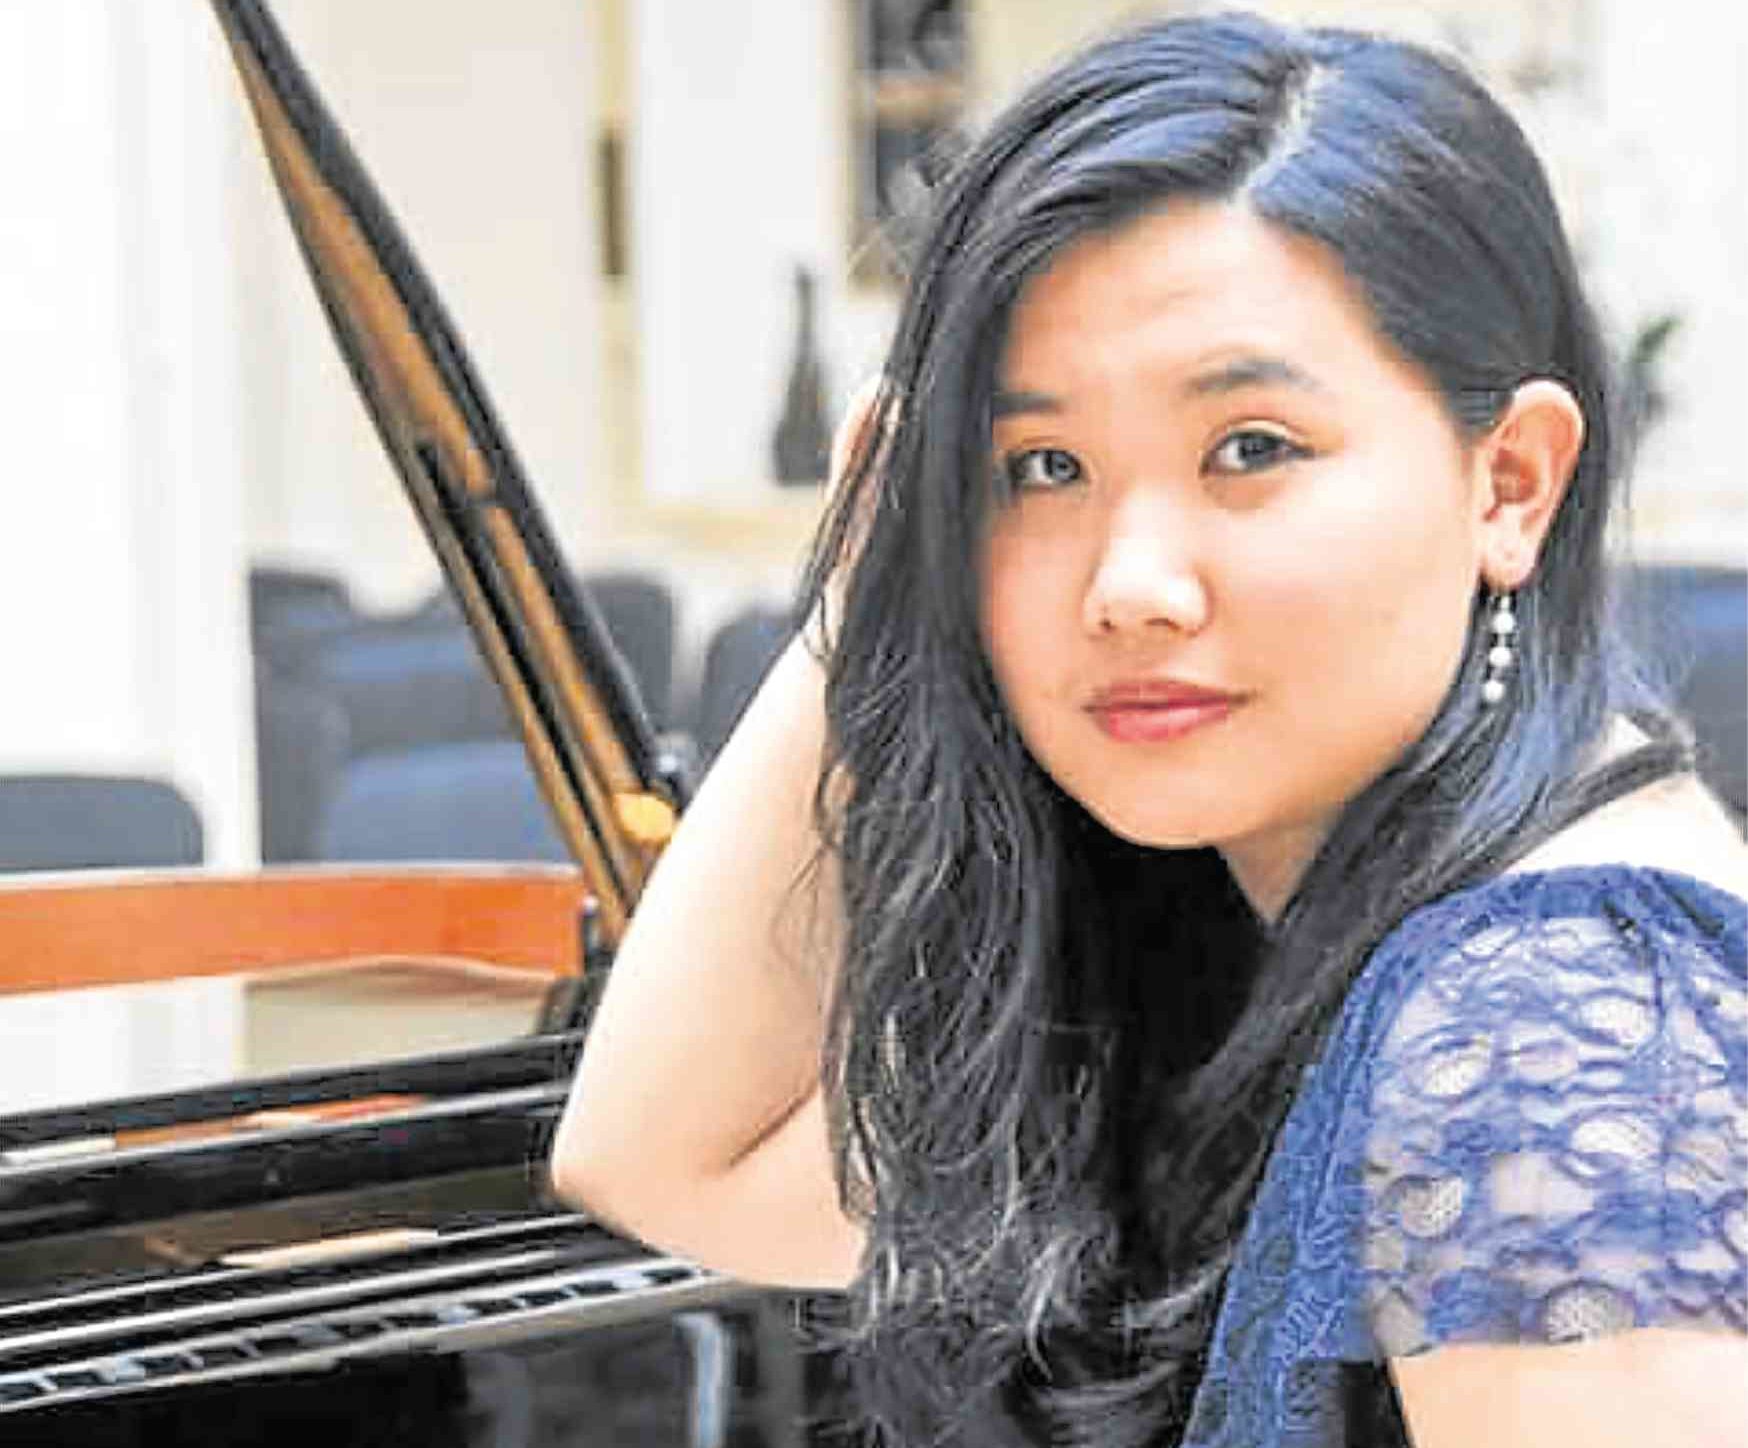 Pianist Inna Montesclaros to hold recital for charity